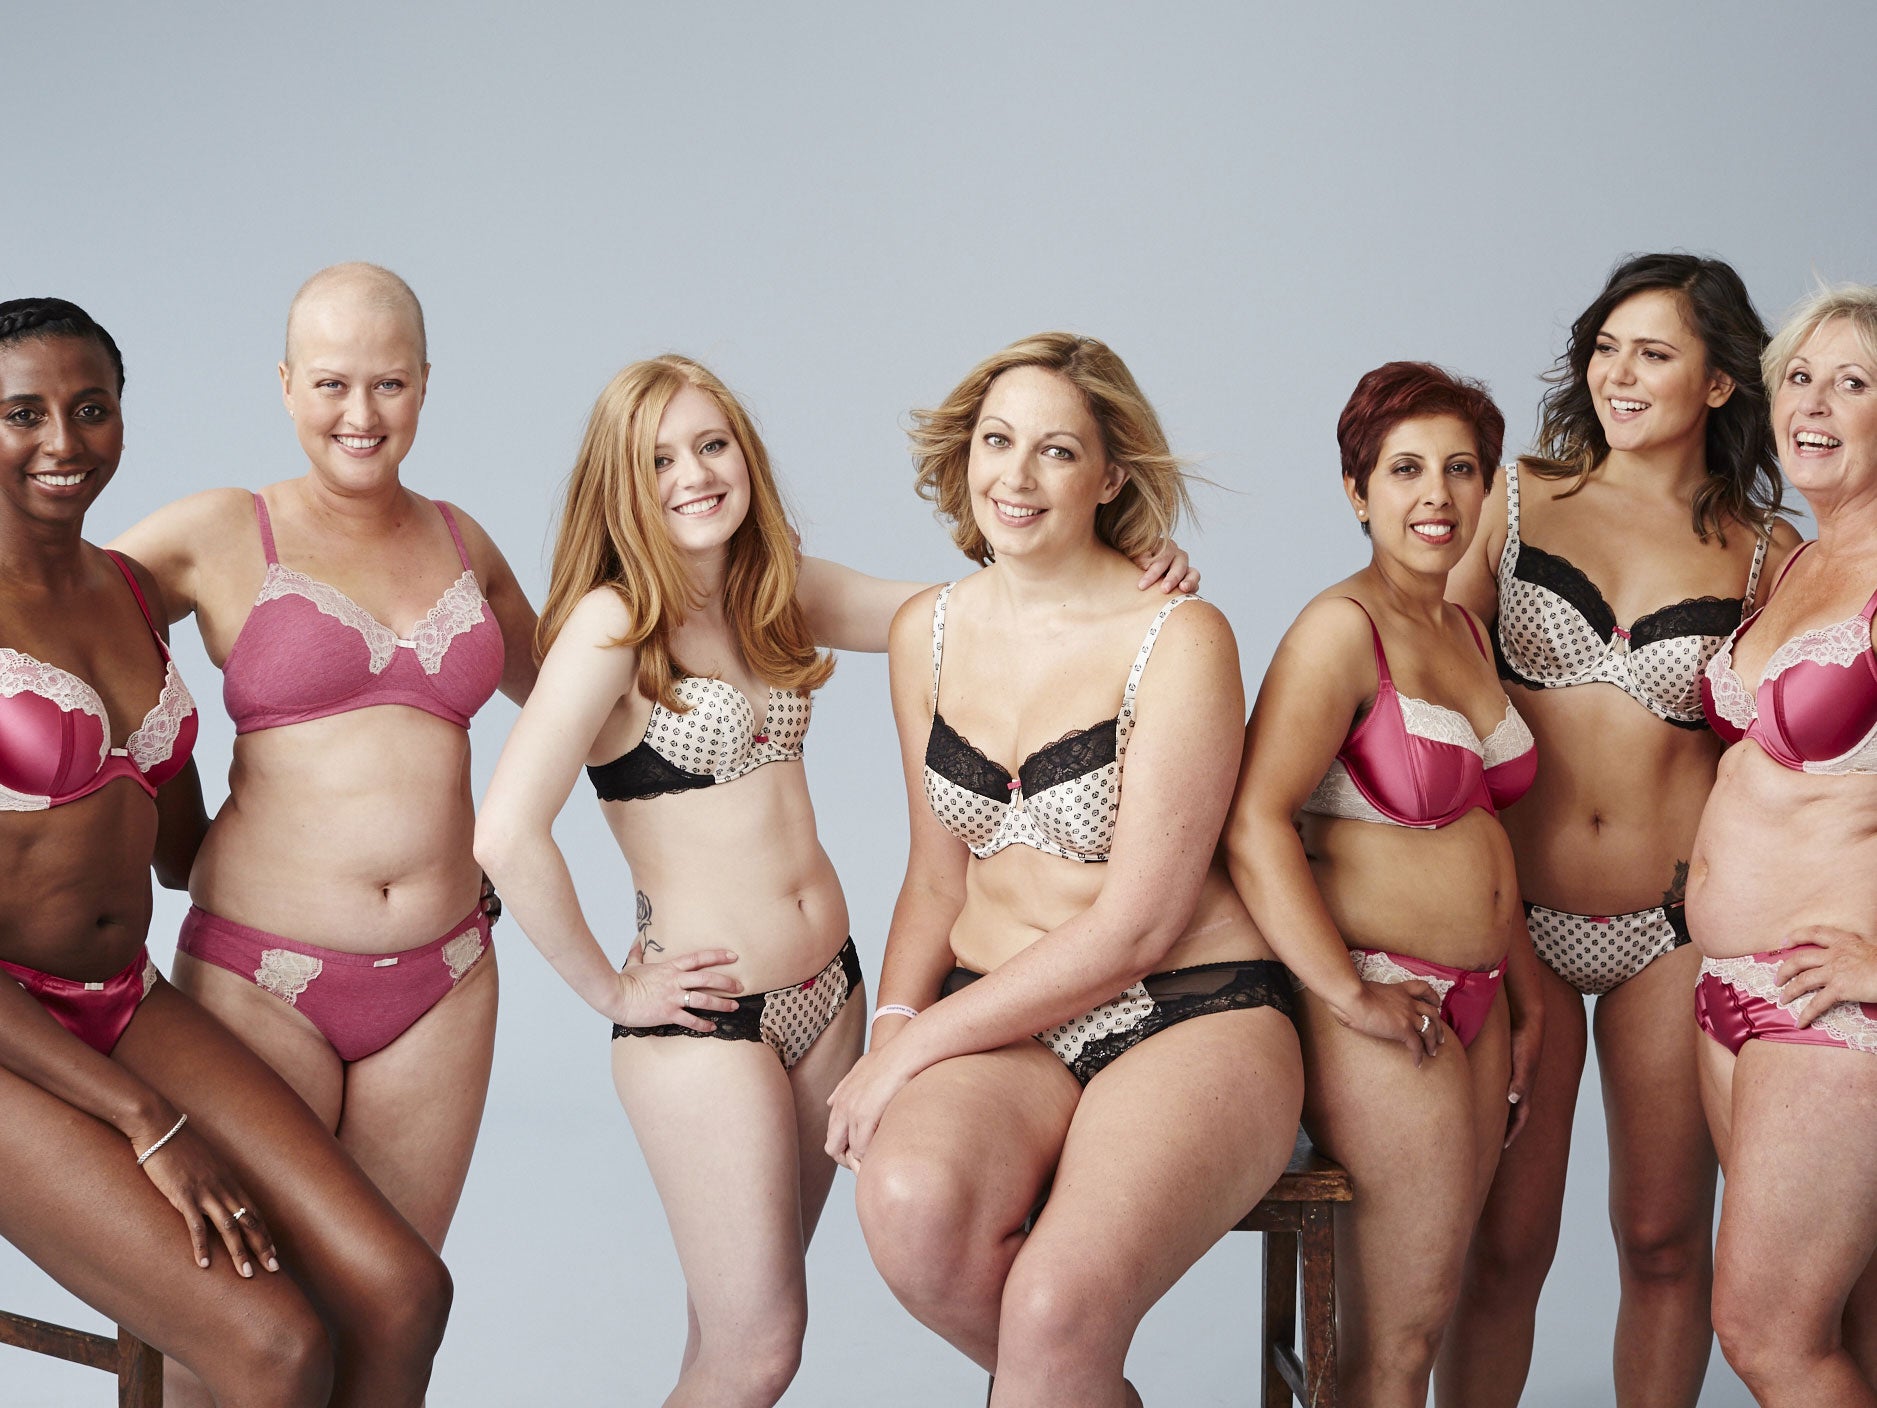 Mark & Spencer ads feature breast cancer survivors in